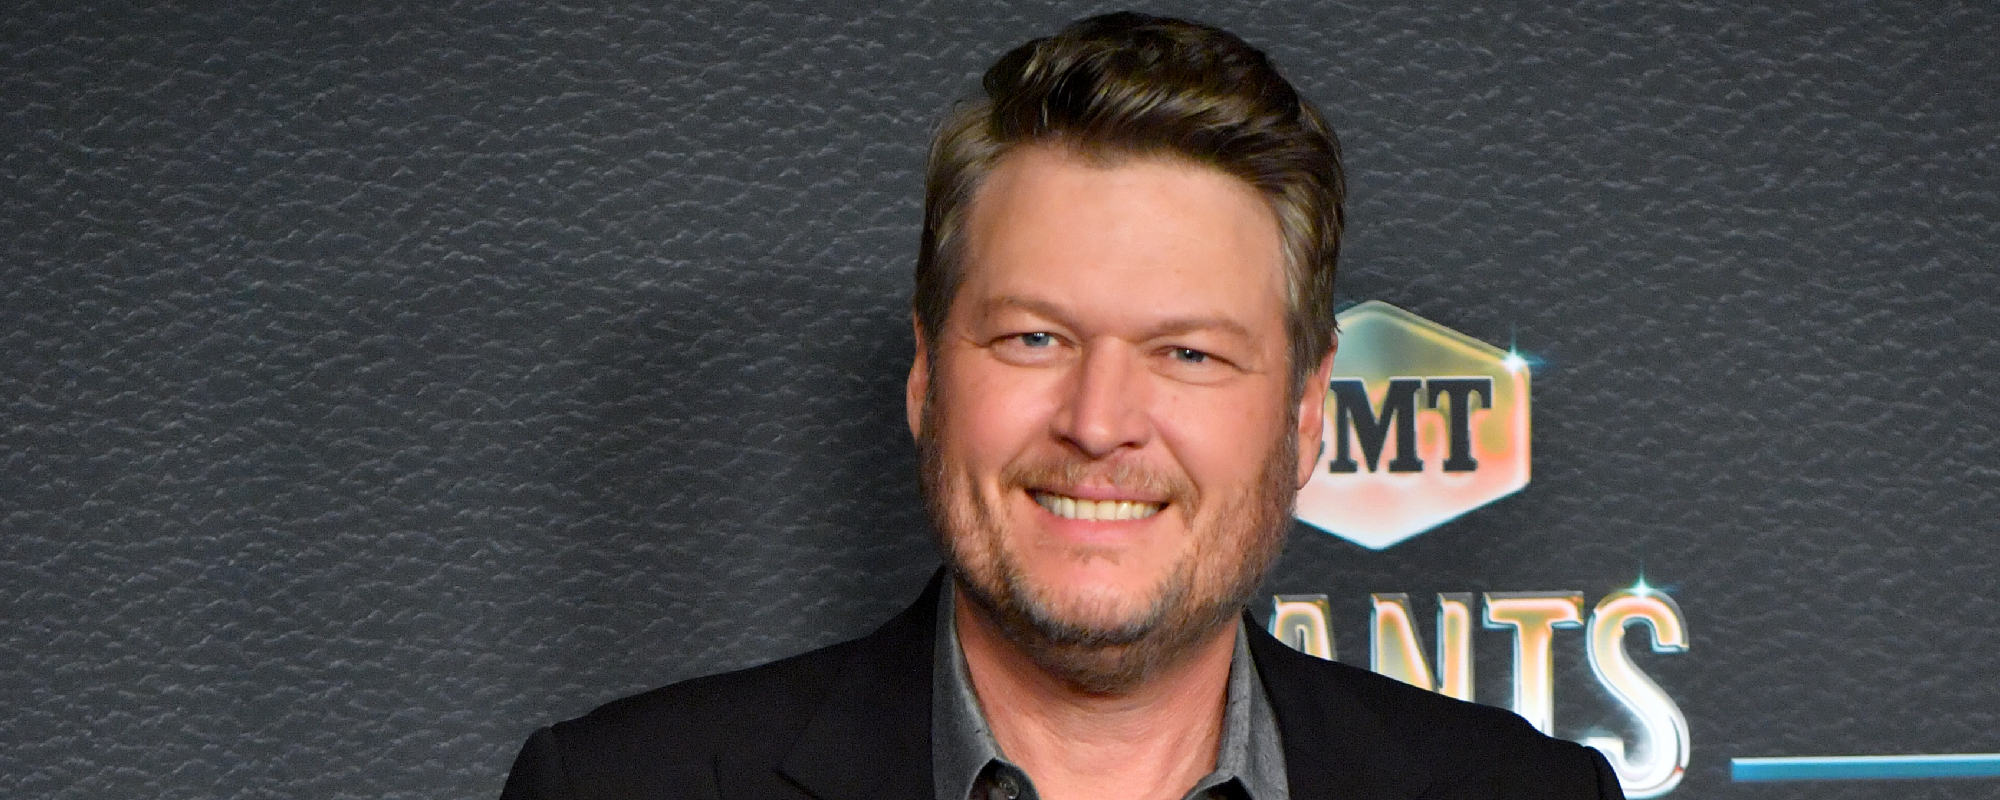 Blake Shelton Sent Reba McEntire & ‘The Voice’ Coaches Arguably the Corniest Gift of All Time